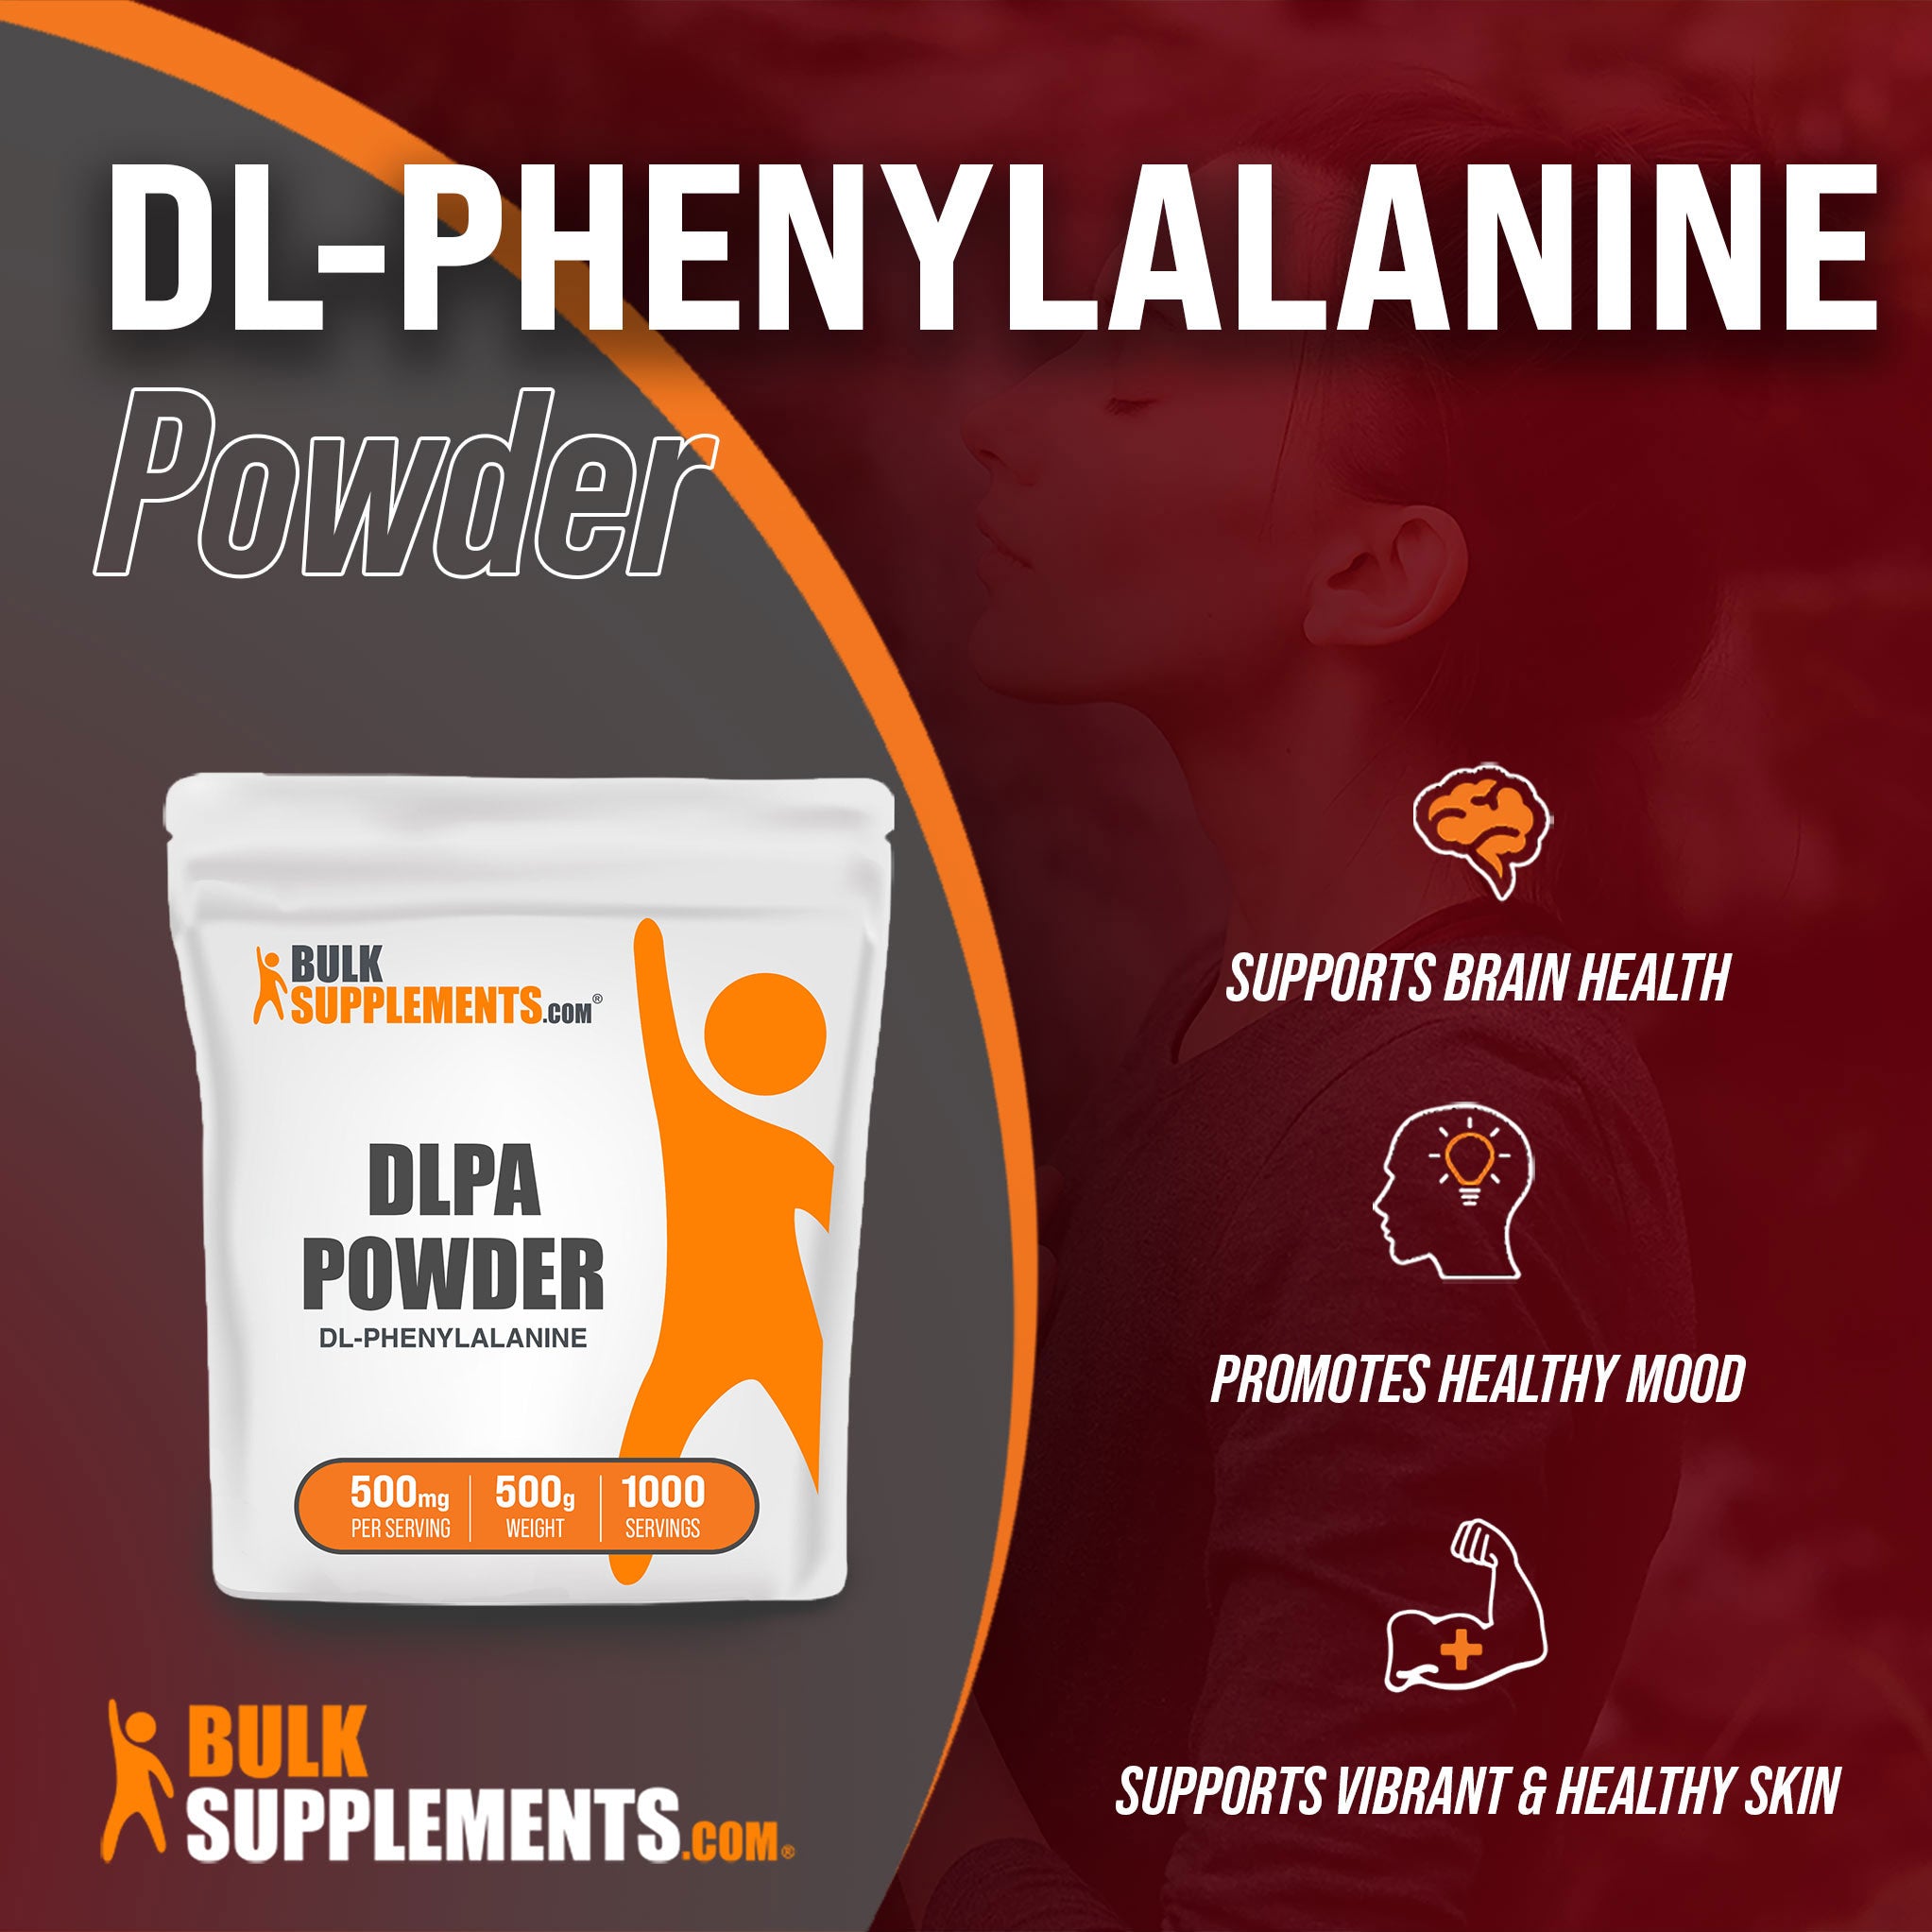 Benefits of DL-Phenylalanine; supports brain health, promotes healthy mood, supports vibrant & healthy skin